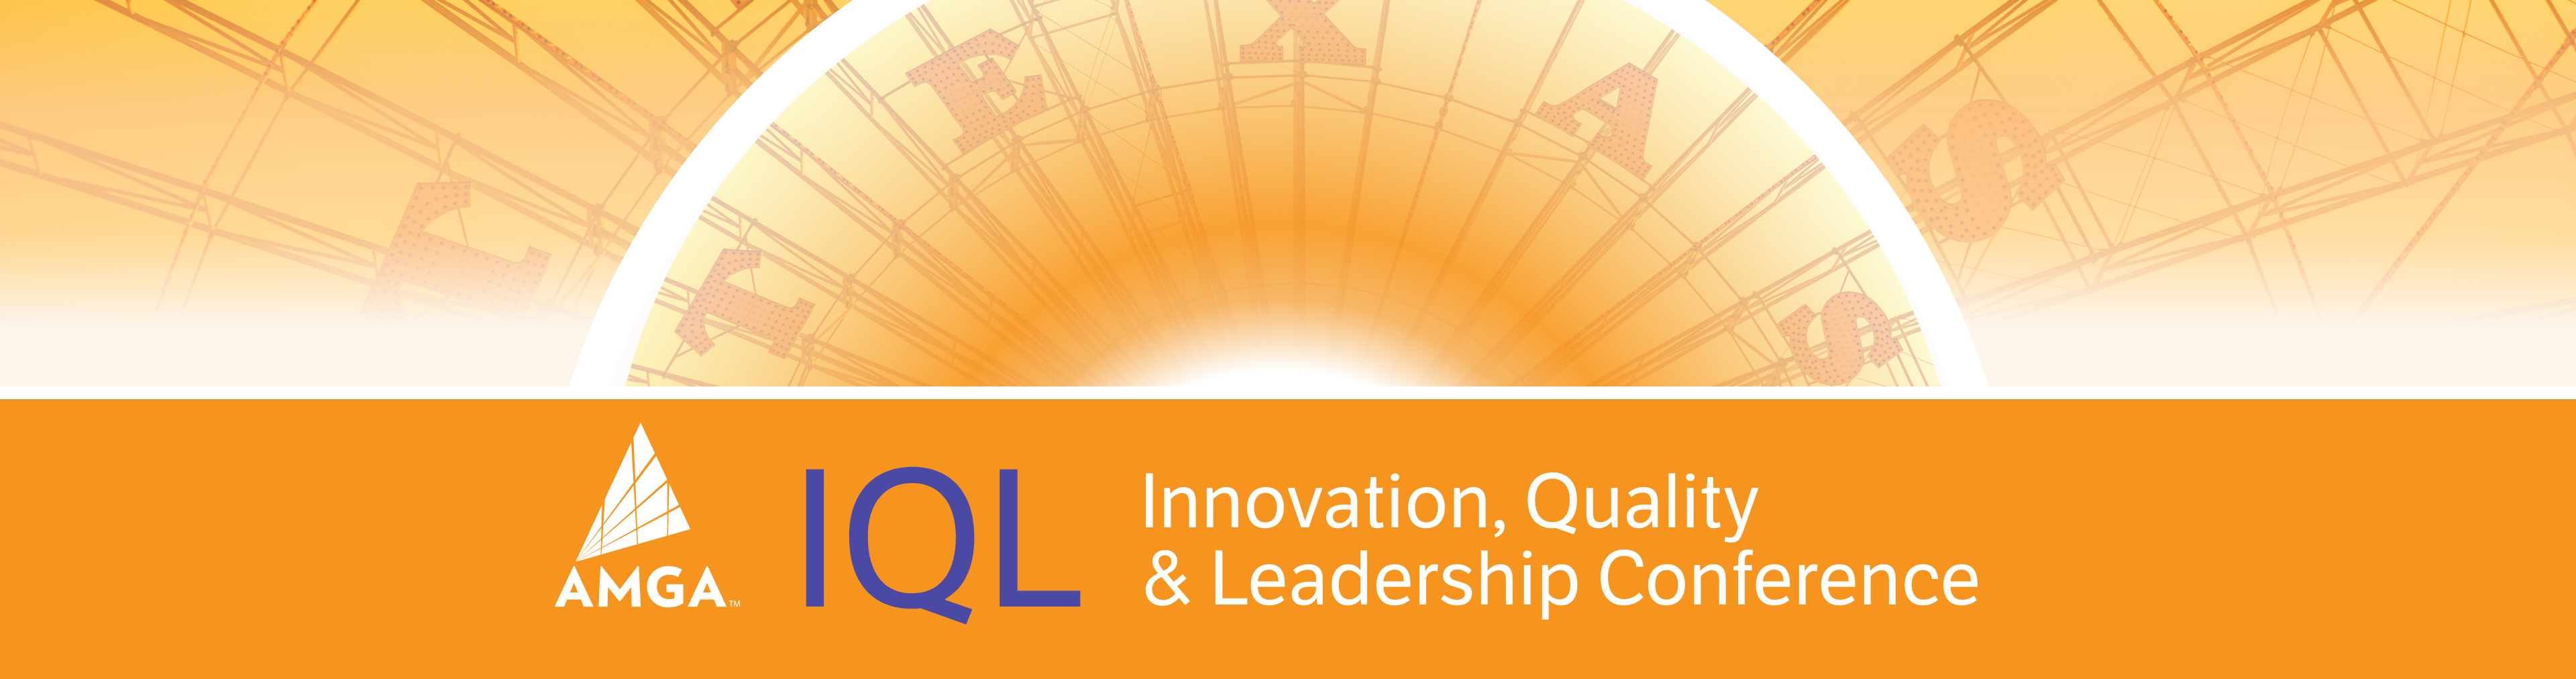 Innovation, Quality & Leadership Conference